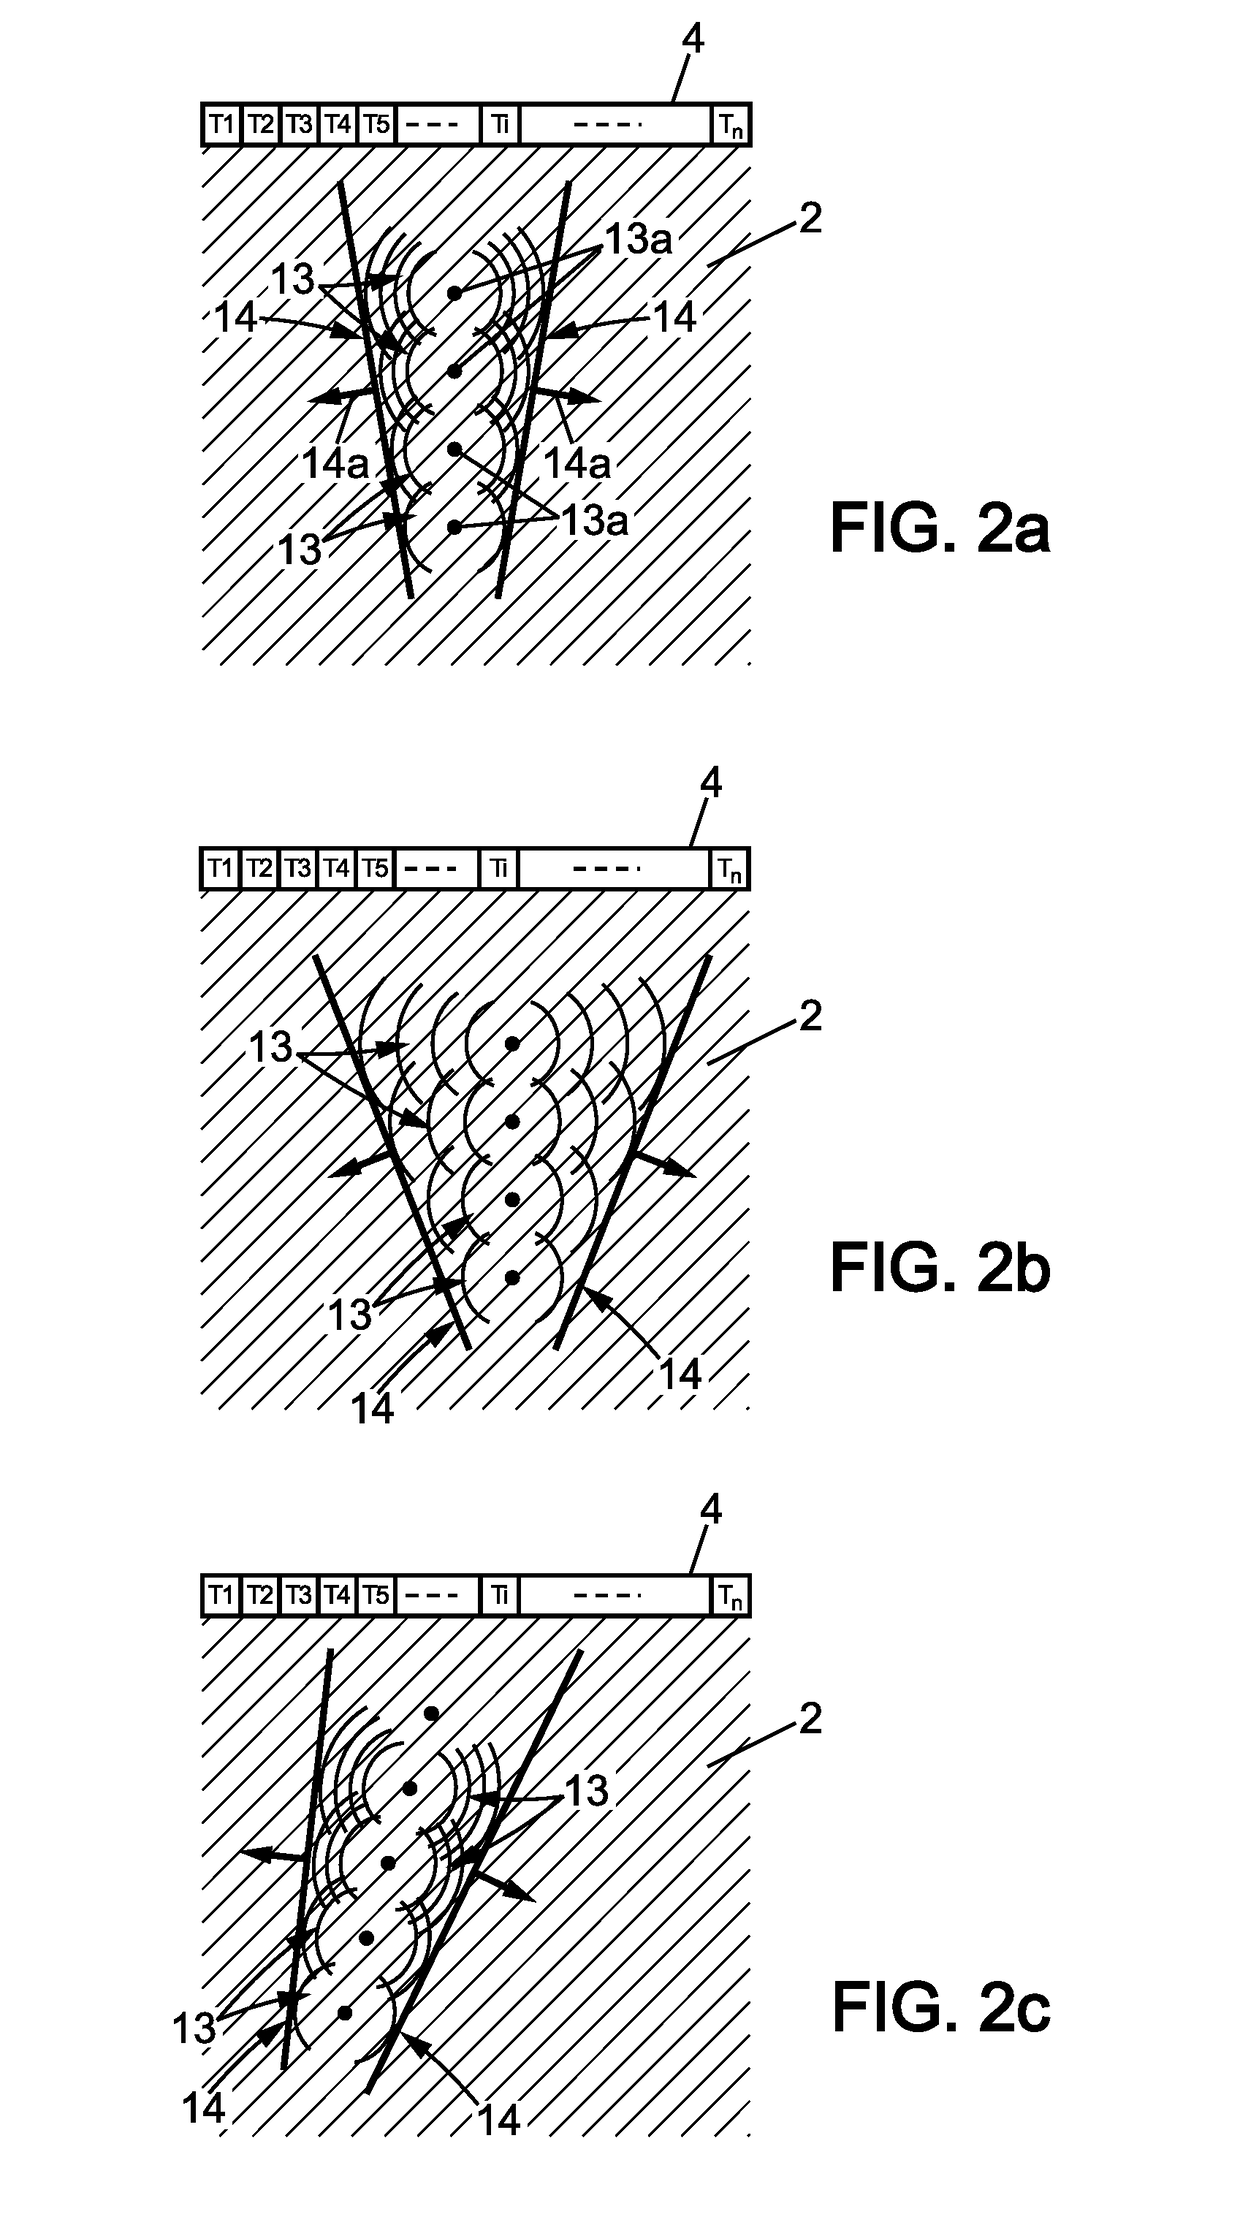 Shear wave elastrography method and apparatus for imaging an anisotropic medium